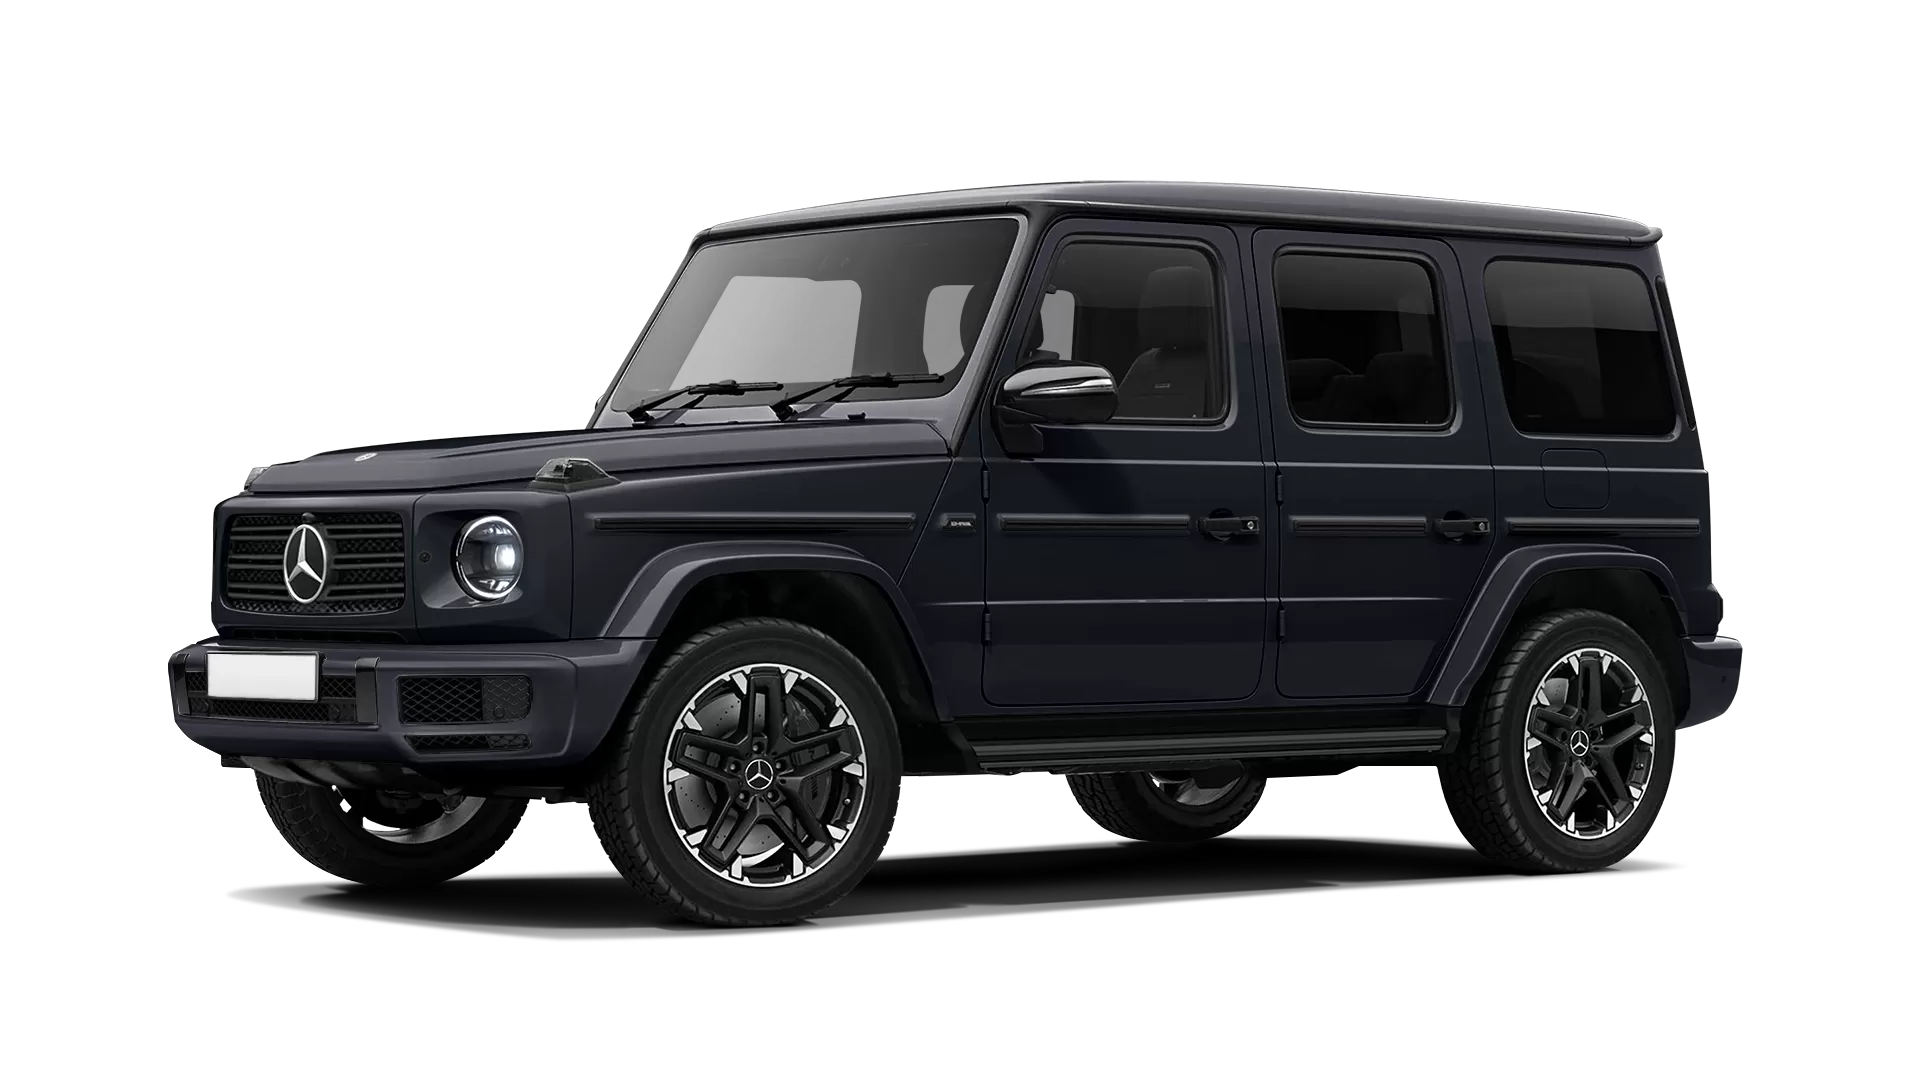 Mercedes G class W463 stock front view in Obsidian Black color